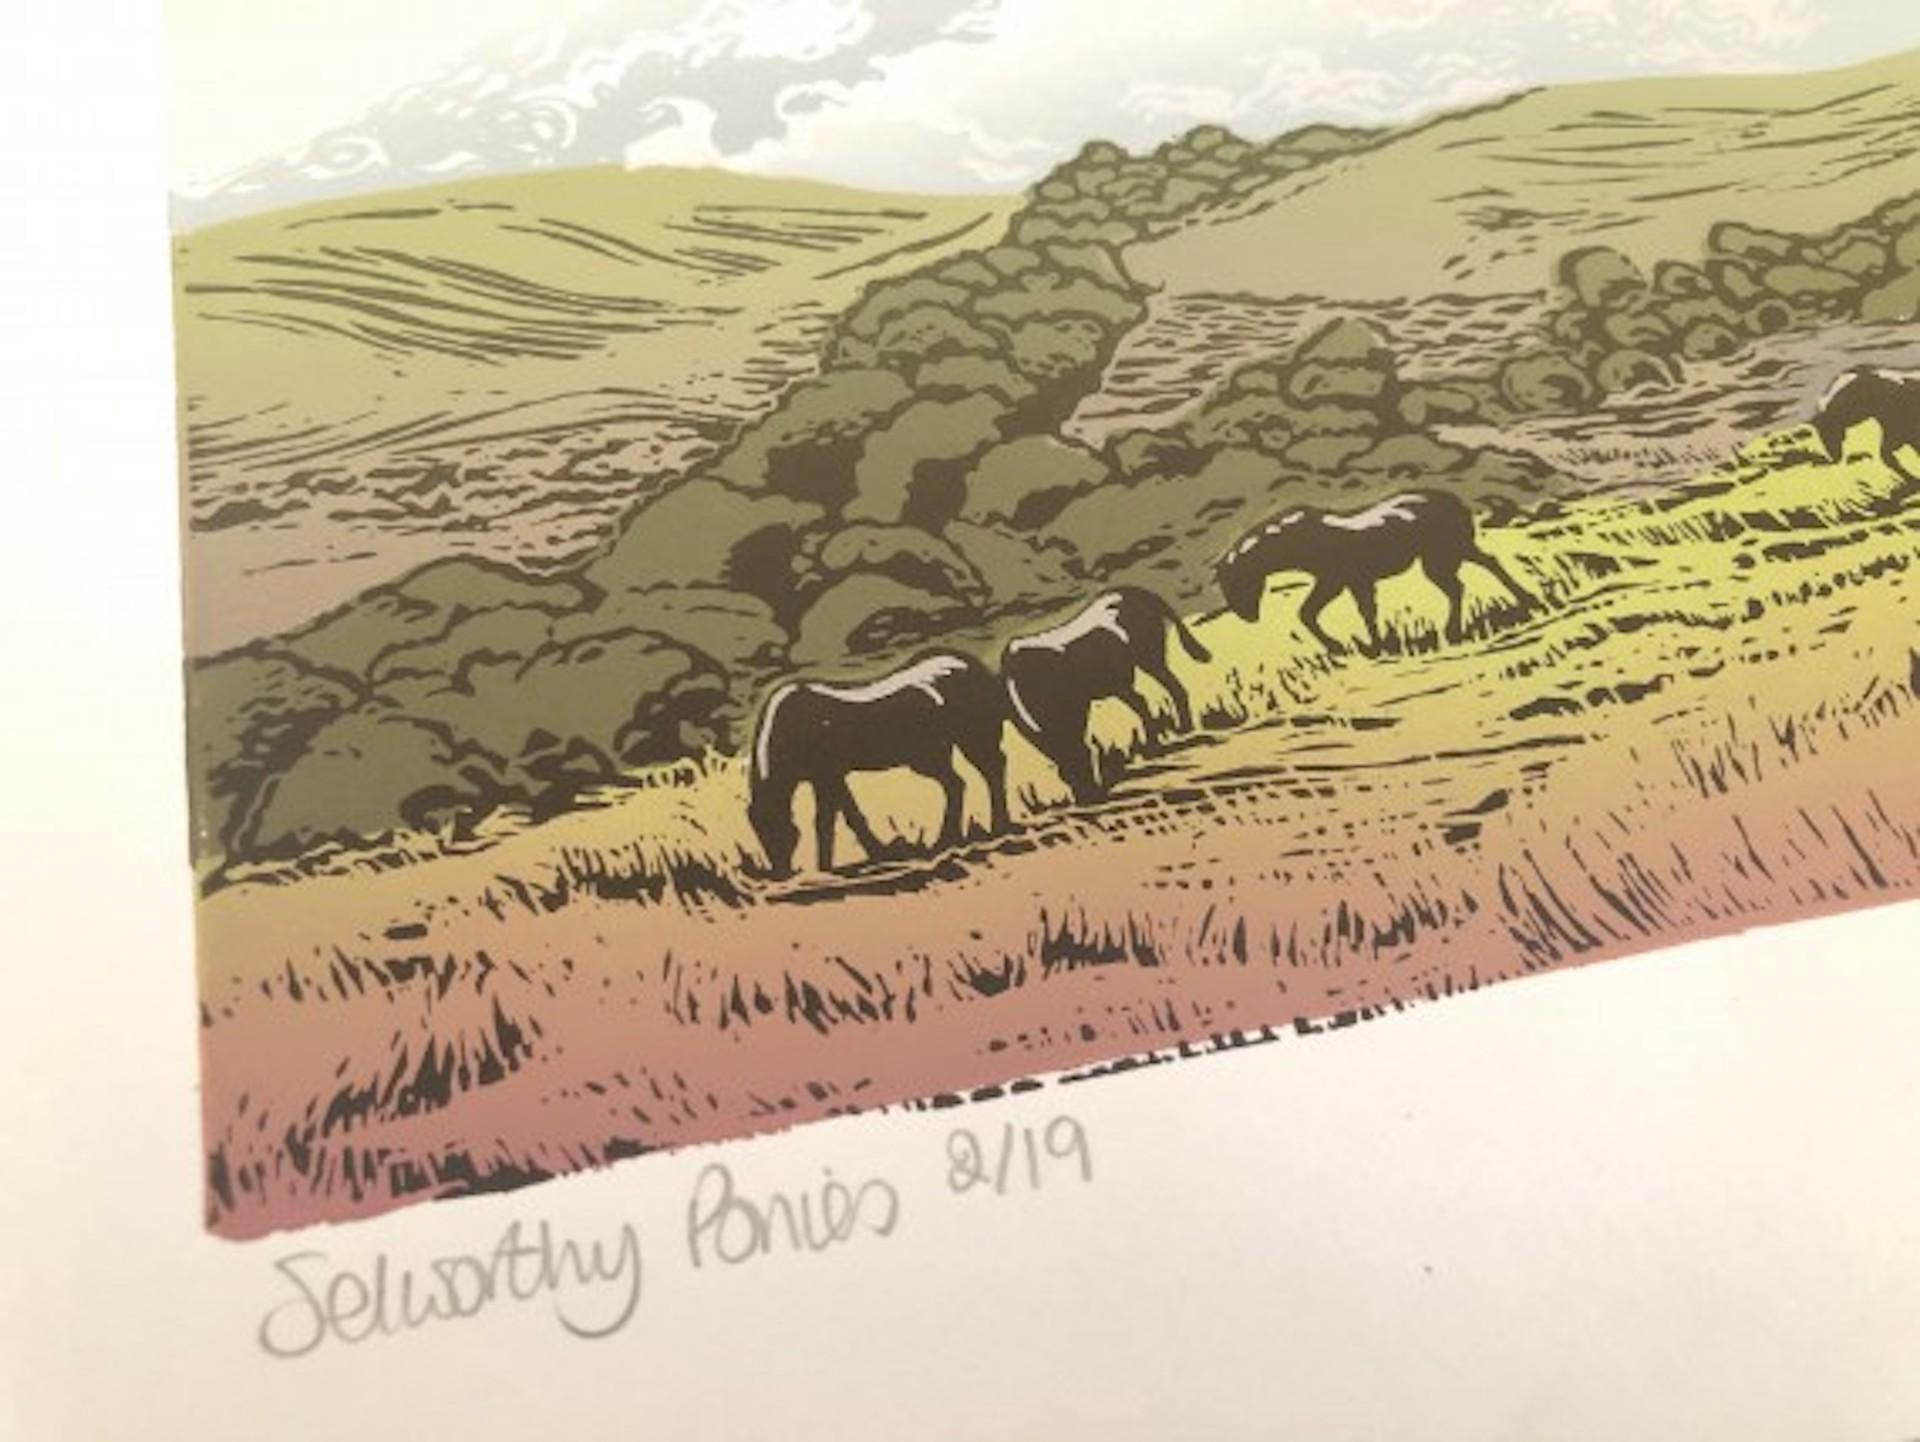 Selworthy Ponies - Exmoor, Lisa Benson, Limited Edition Animal Landscape Print For Sale 1